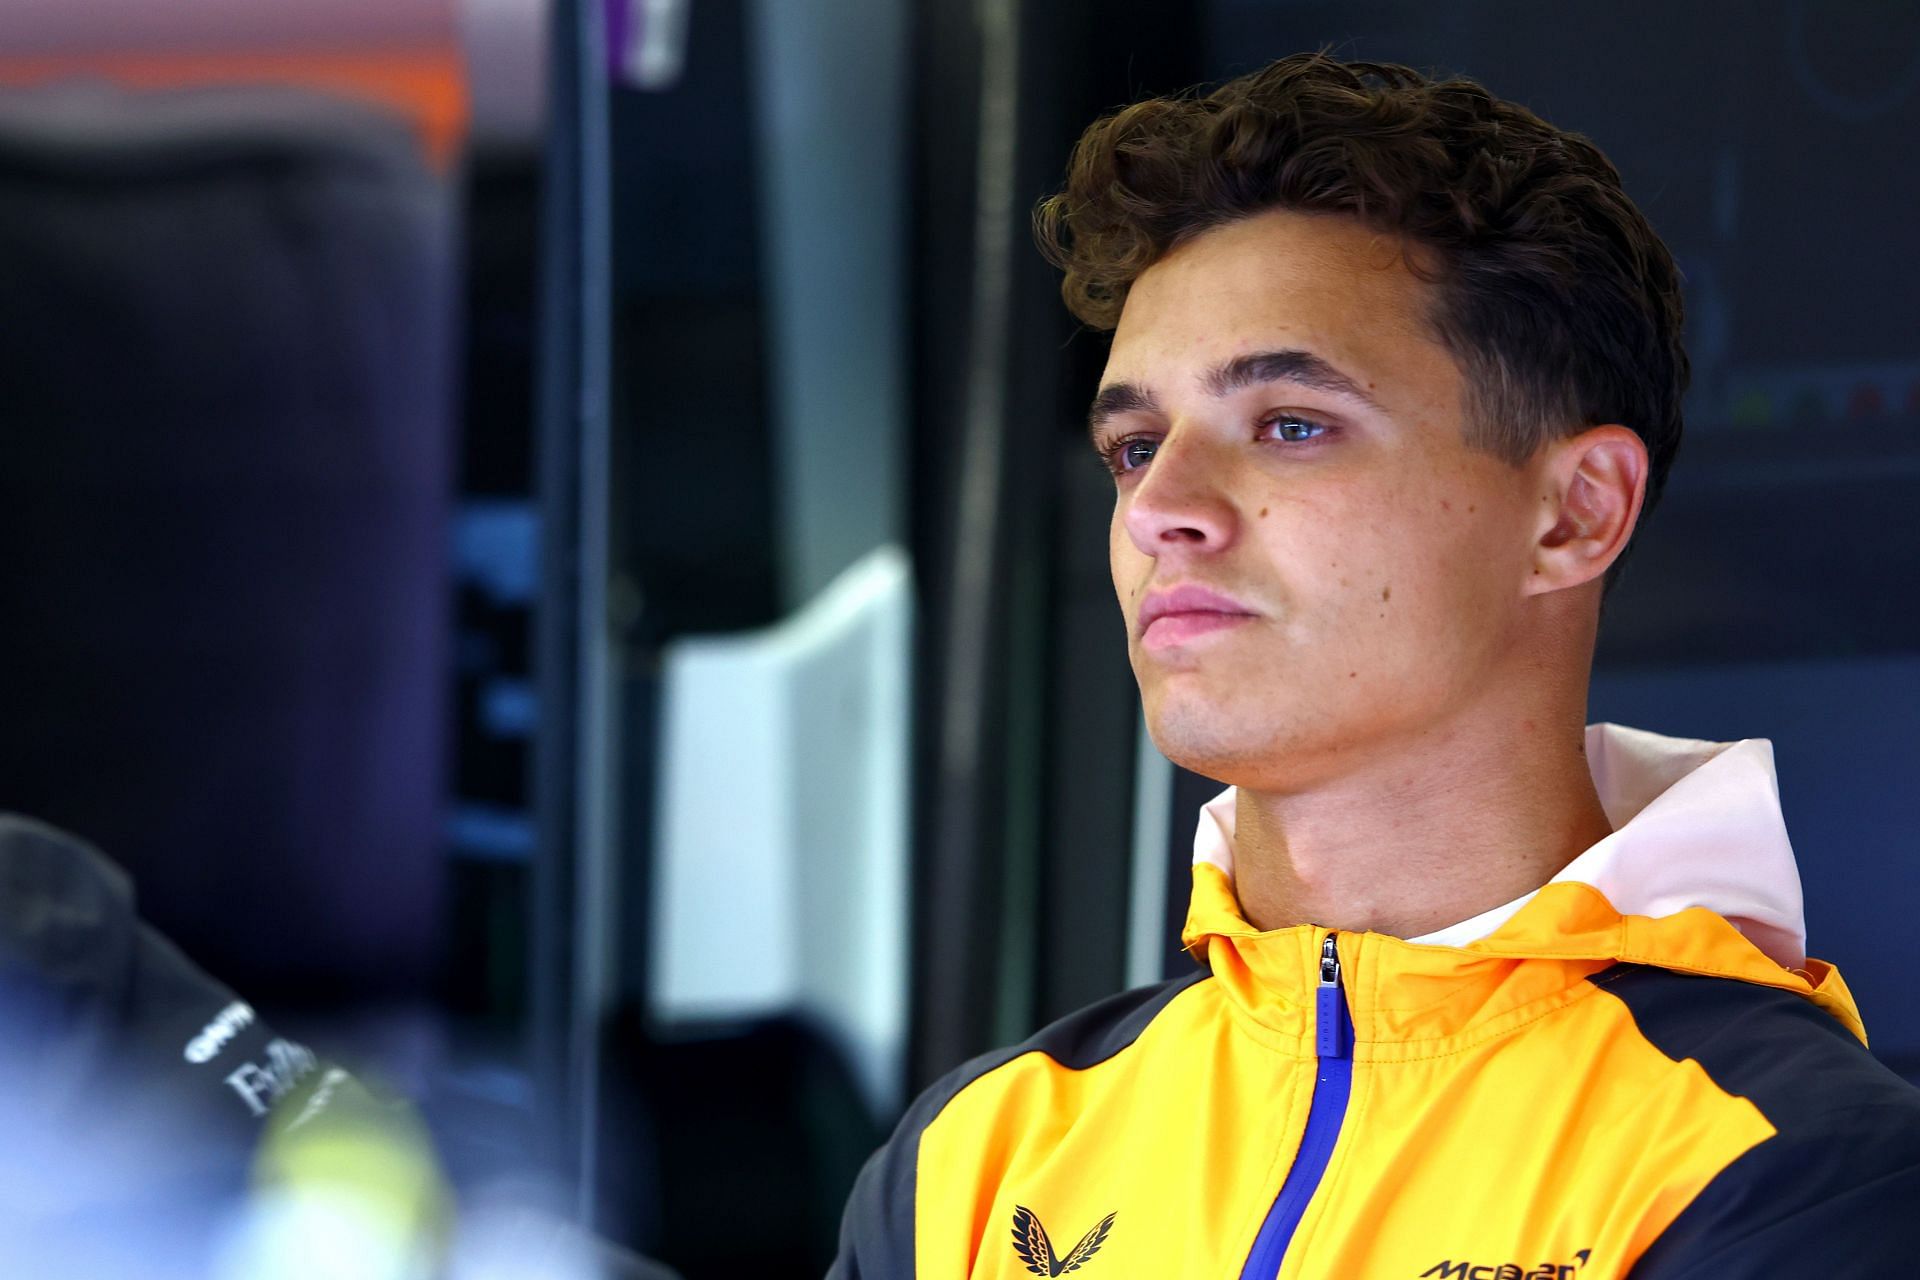 Lando Norris looks on in the garage during practice ahead of the F1 Grand Prix of Belgium at Circuit de Spa-Francorchamps on August 26, 2022 in Spa, Belgium. (Photo by Mark Thompson/Getty Images)